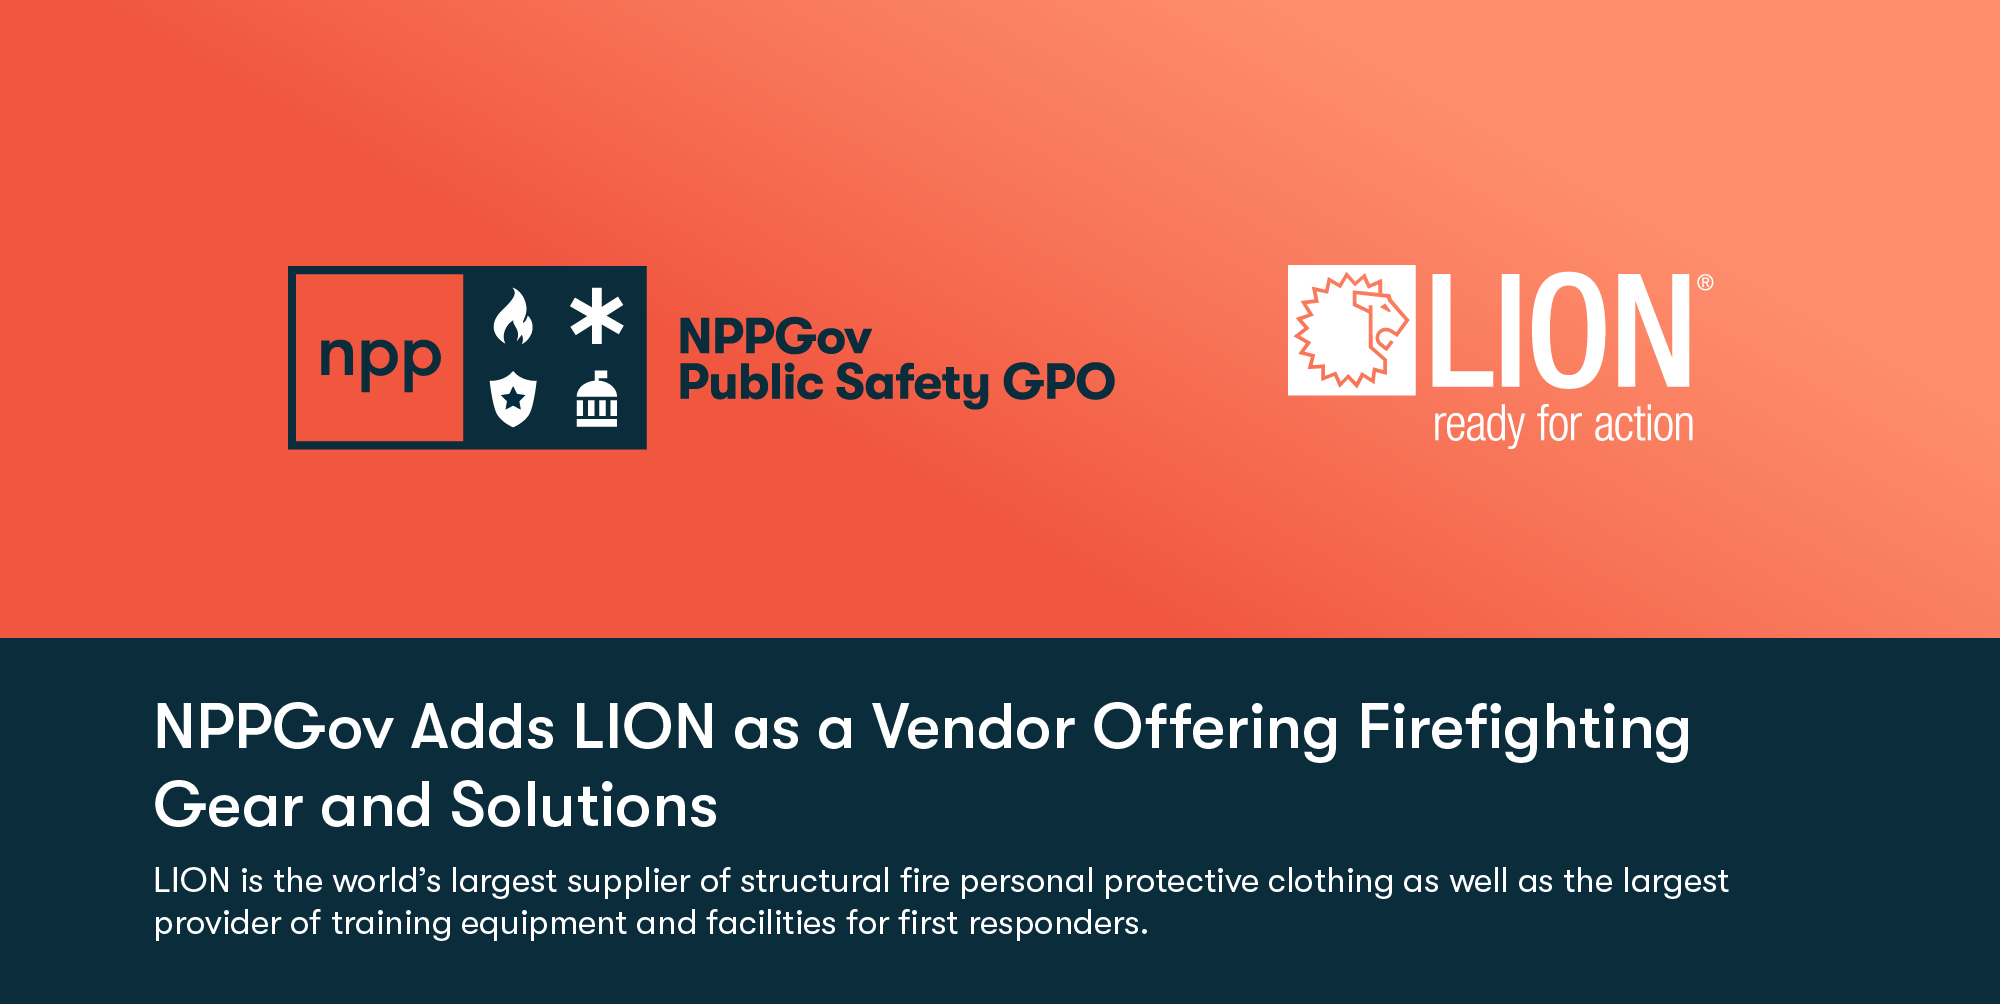 NPPGov Adds LION as a Vendor Offering Firefighting Gear and Solutions